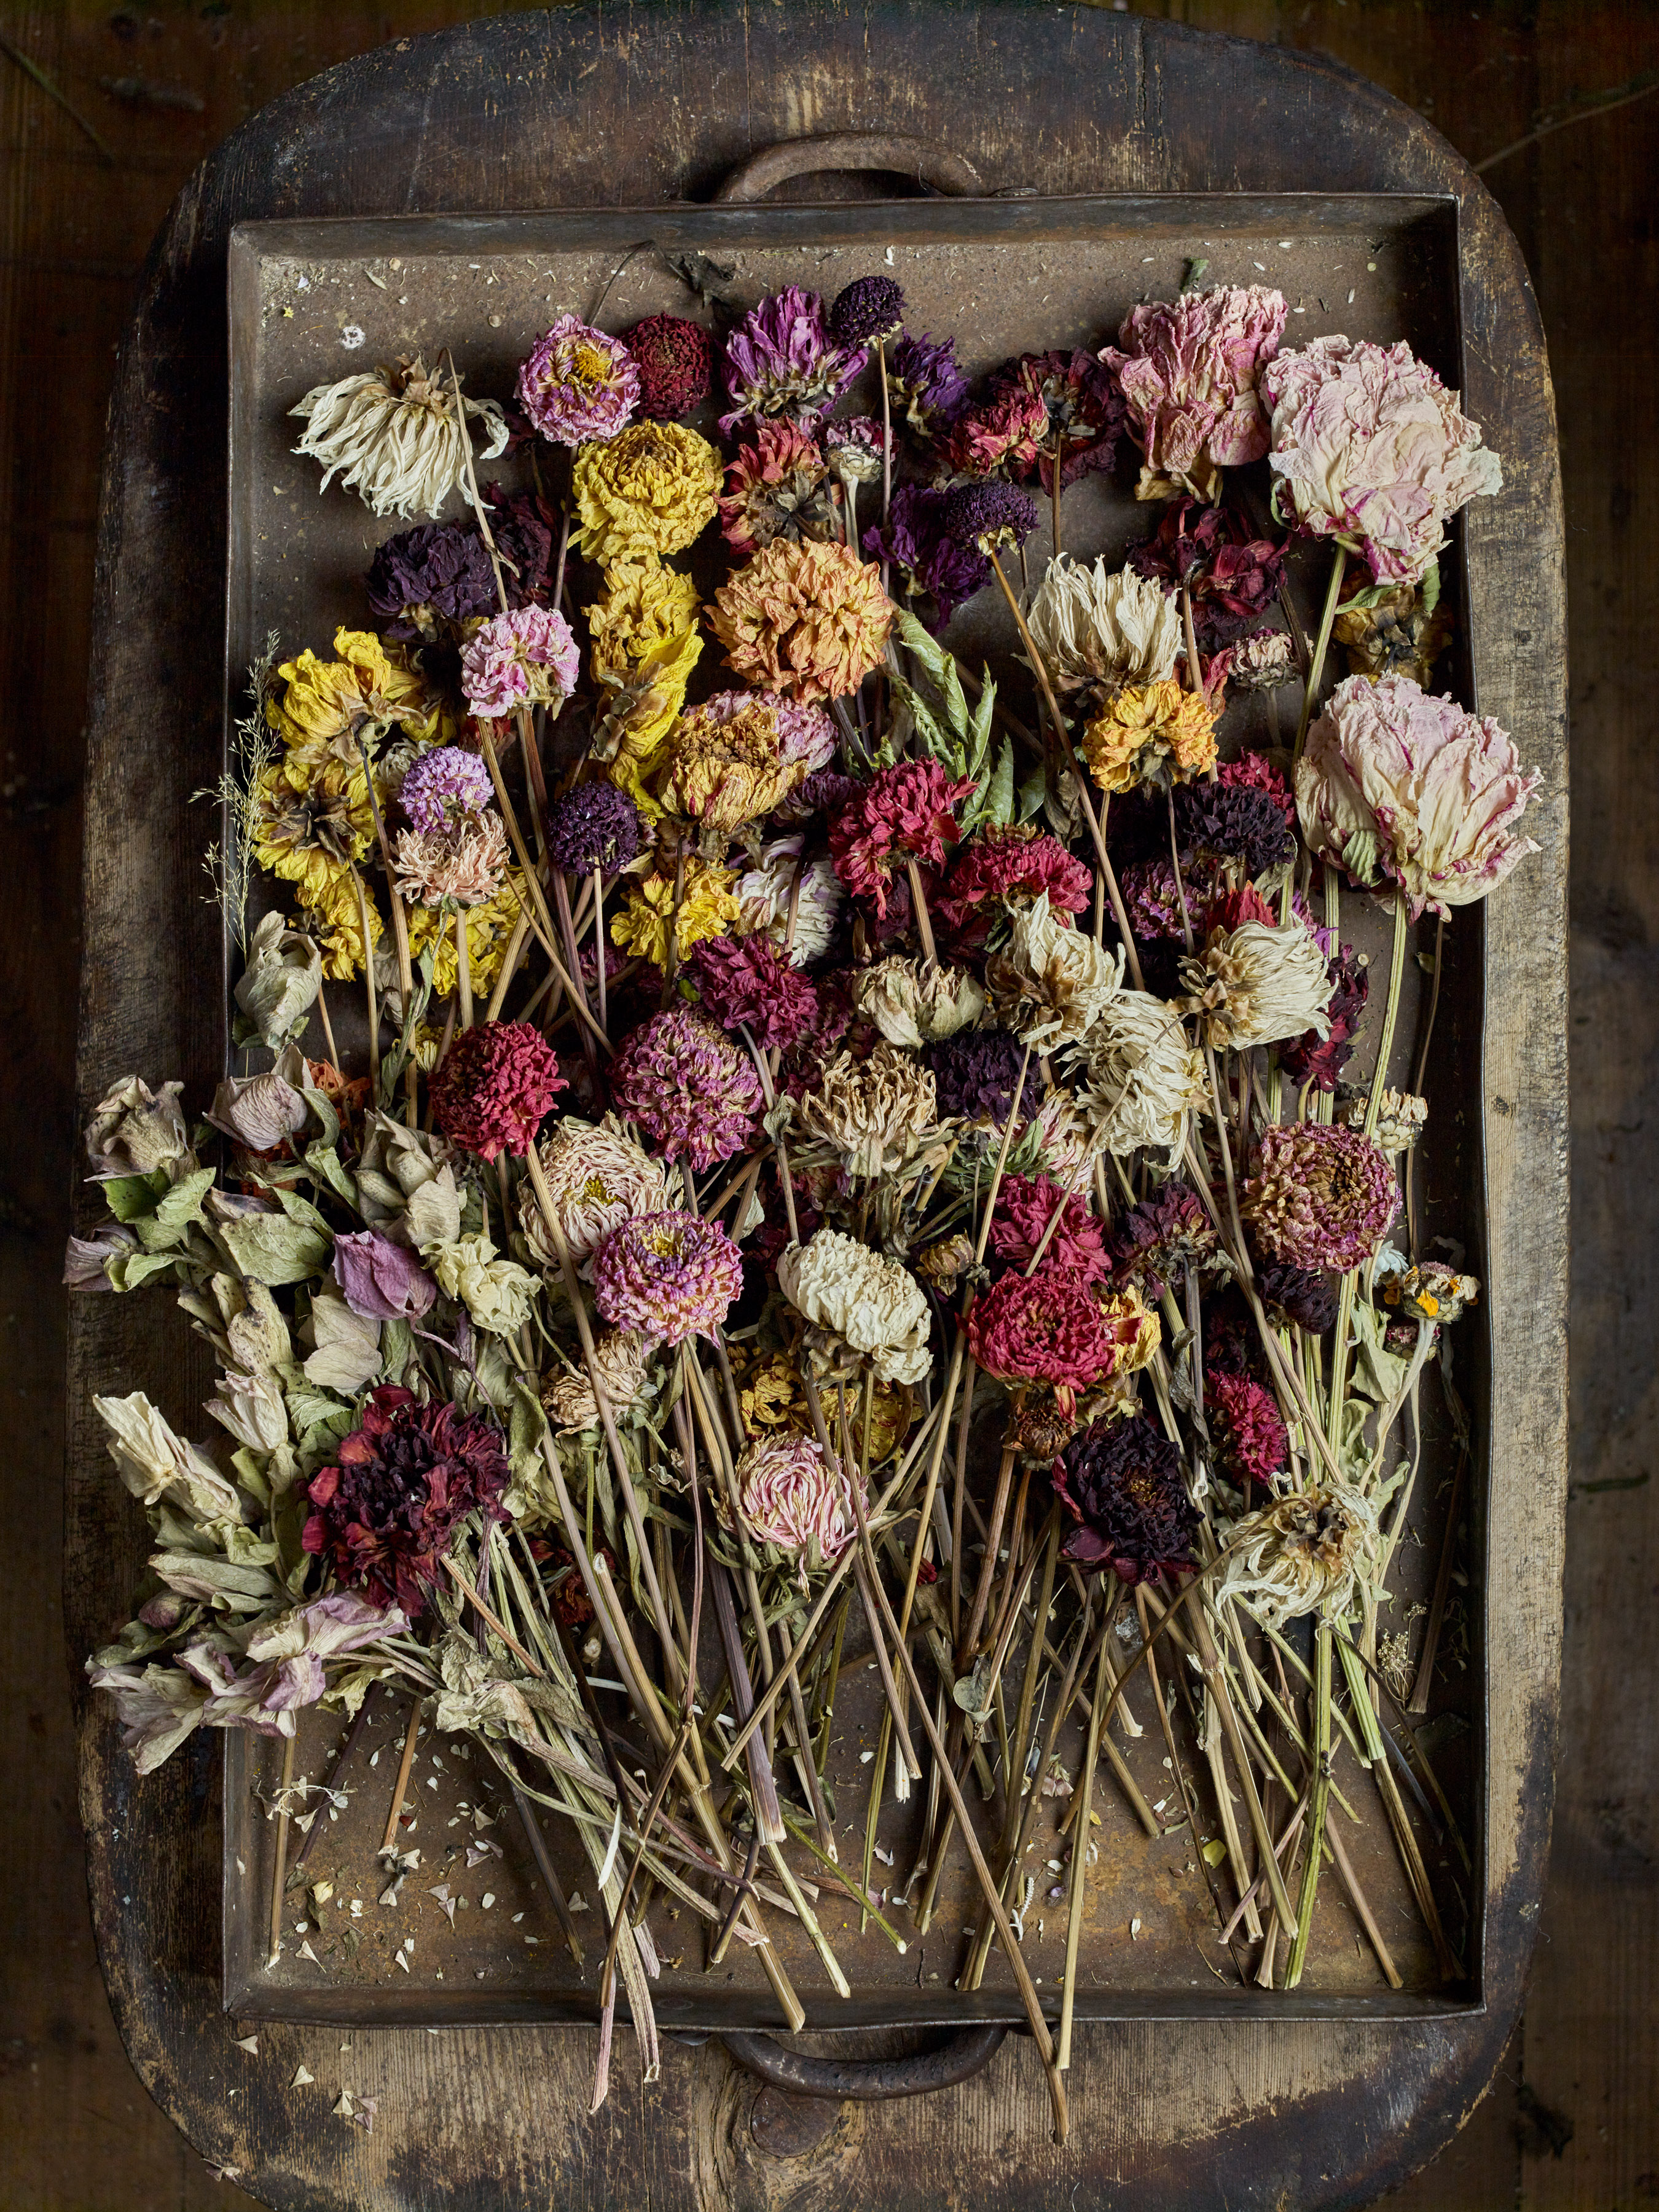 How to dry flowers - Gardens Illustrated